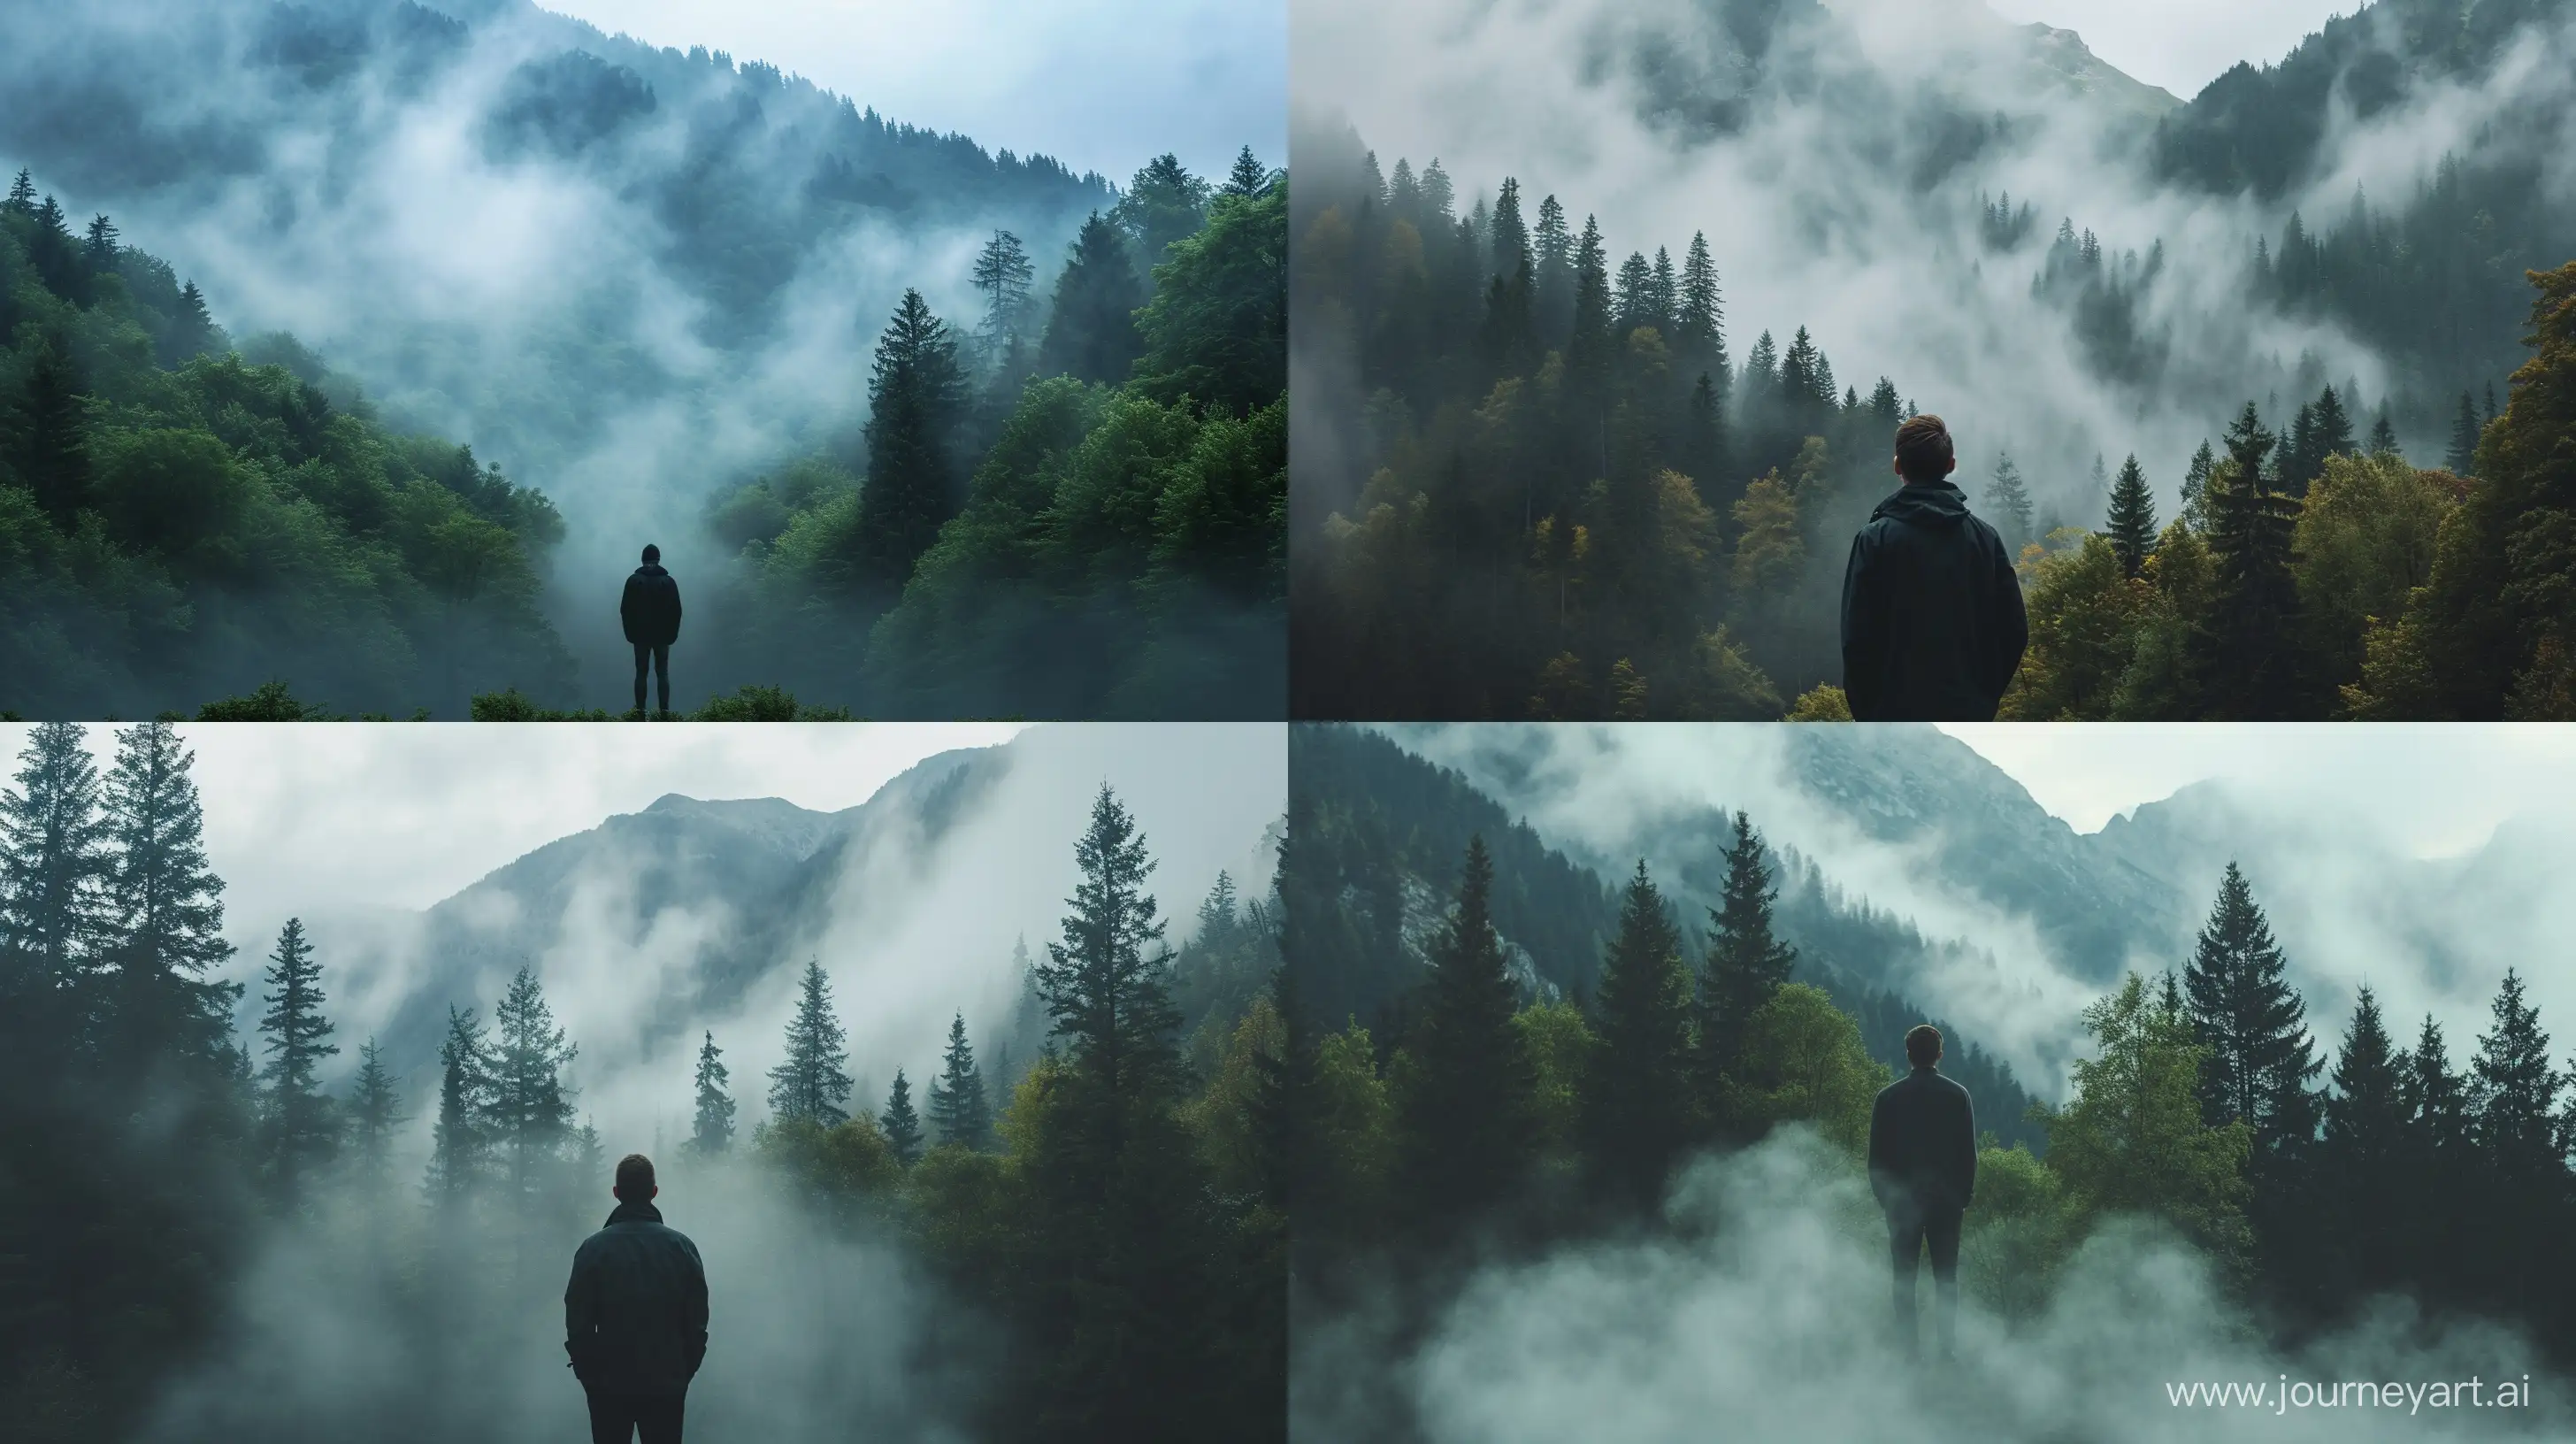 Misty-Forest-Mountains-Landscape-with-Solitary-Figure